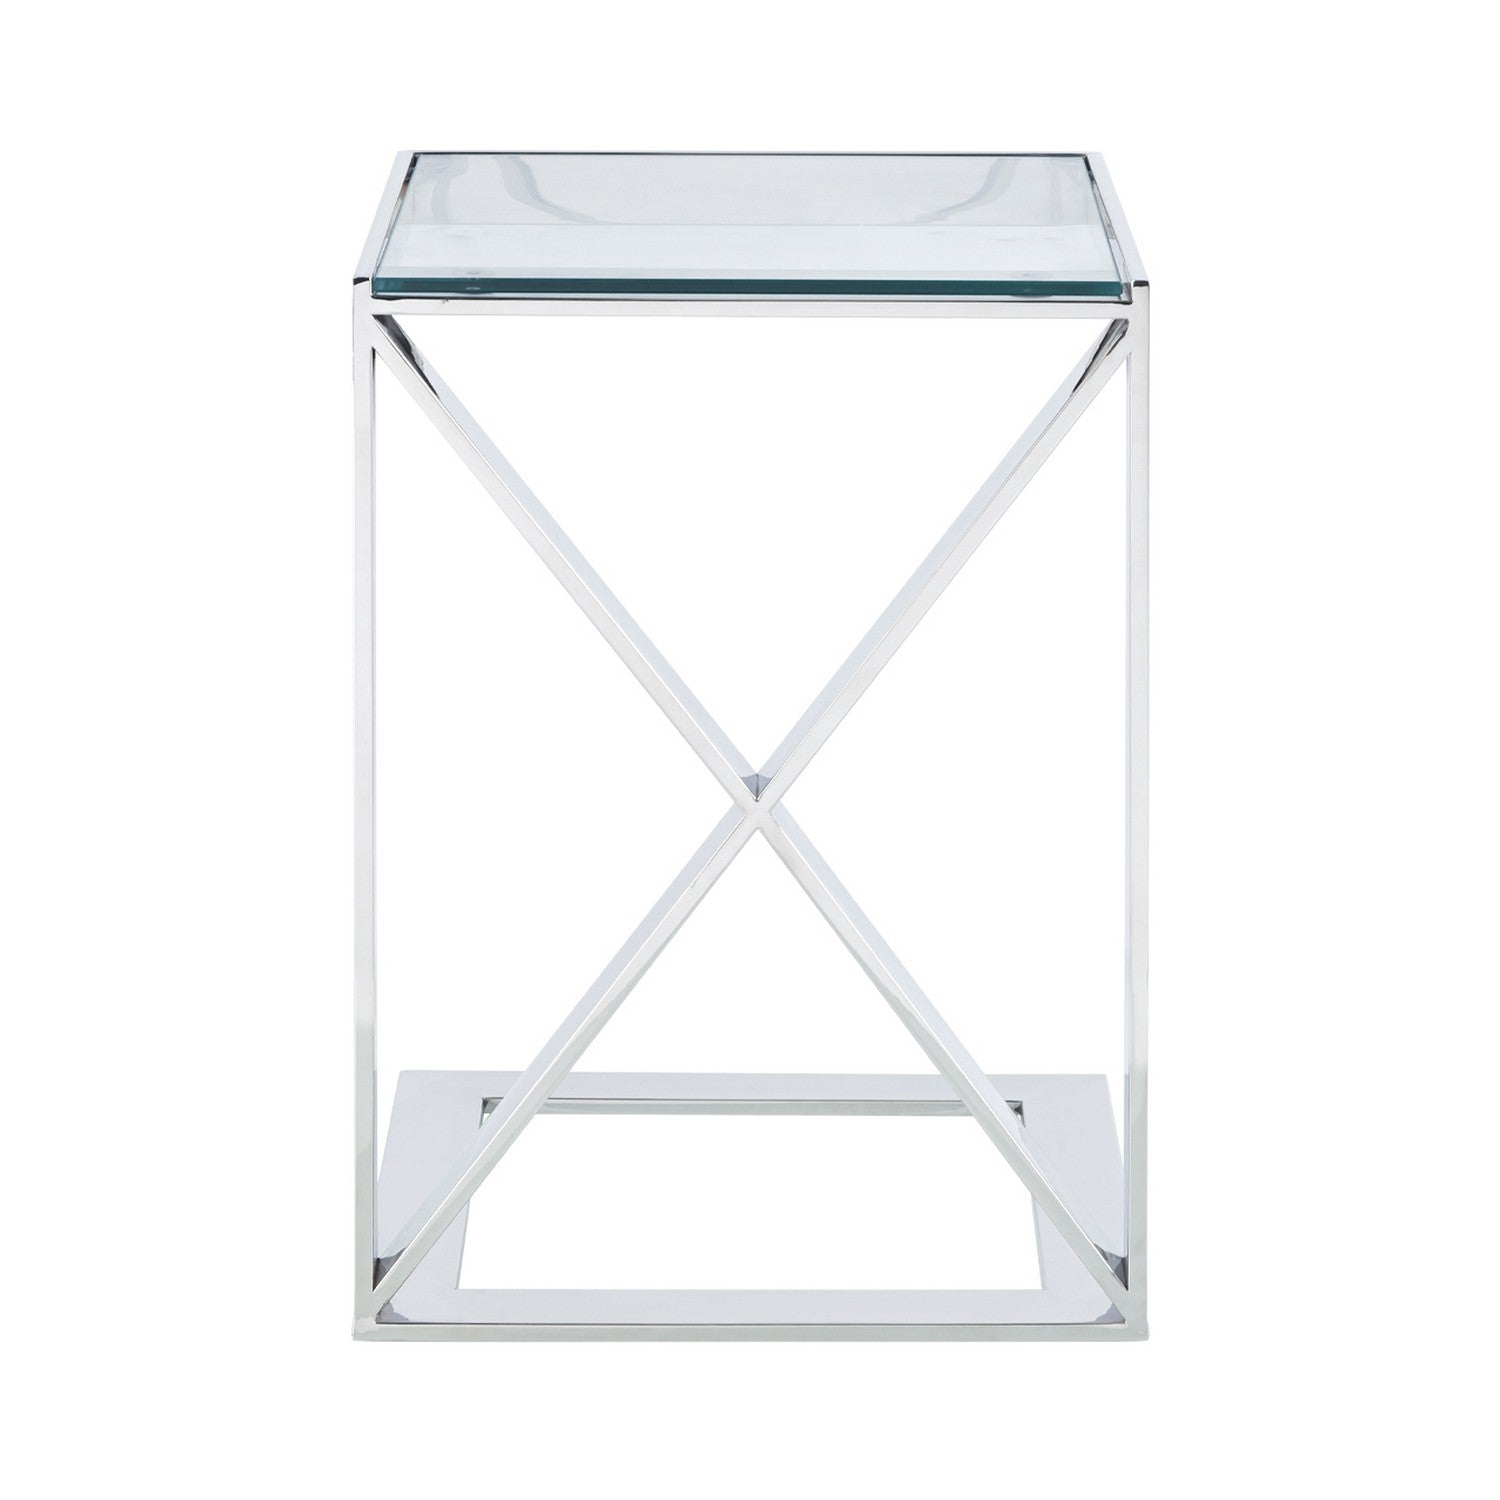 Silver Square Top Glass Clear Crystal Stainless Steel Sofa Table